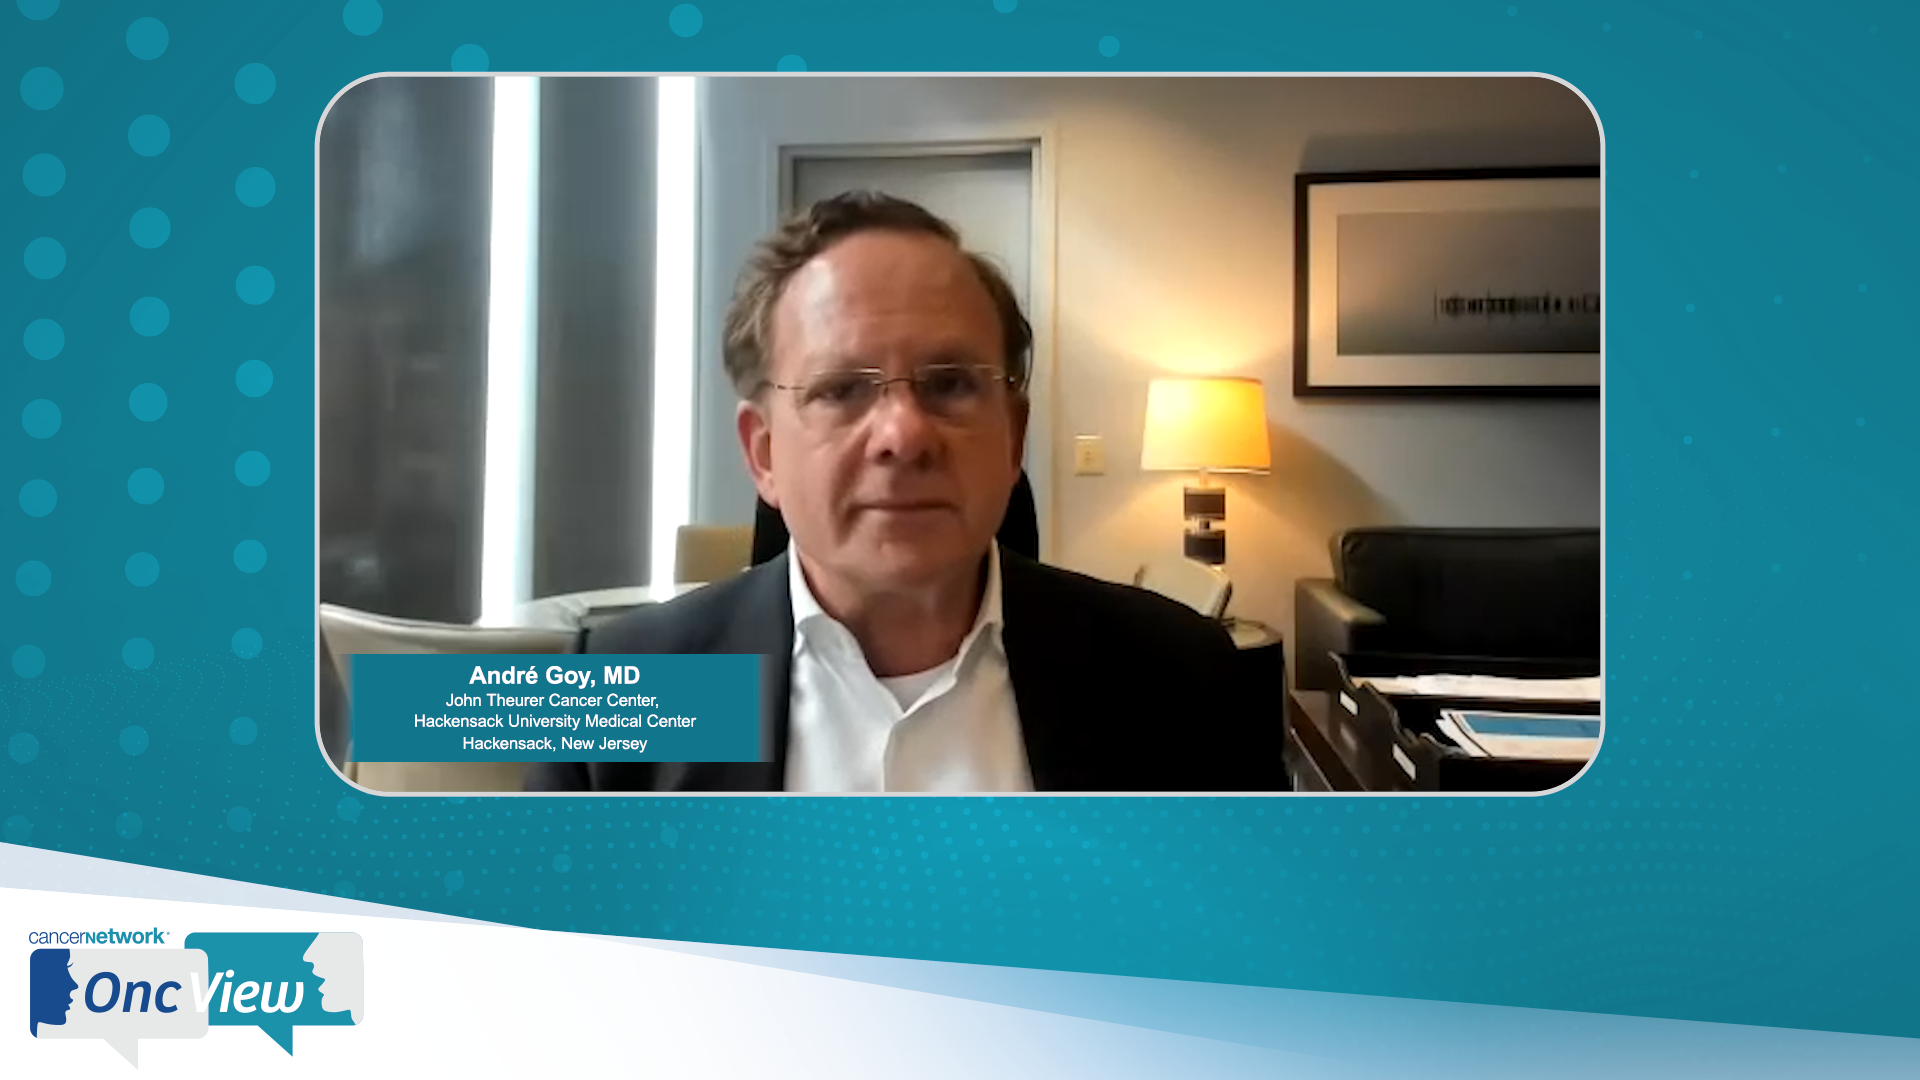 Andre Goy, MD, an expert on mantle cell lymphoma